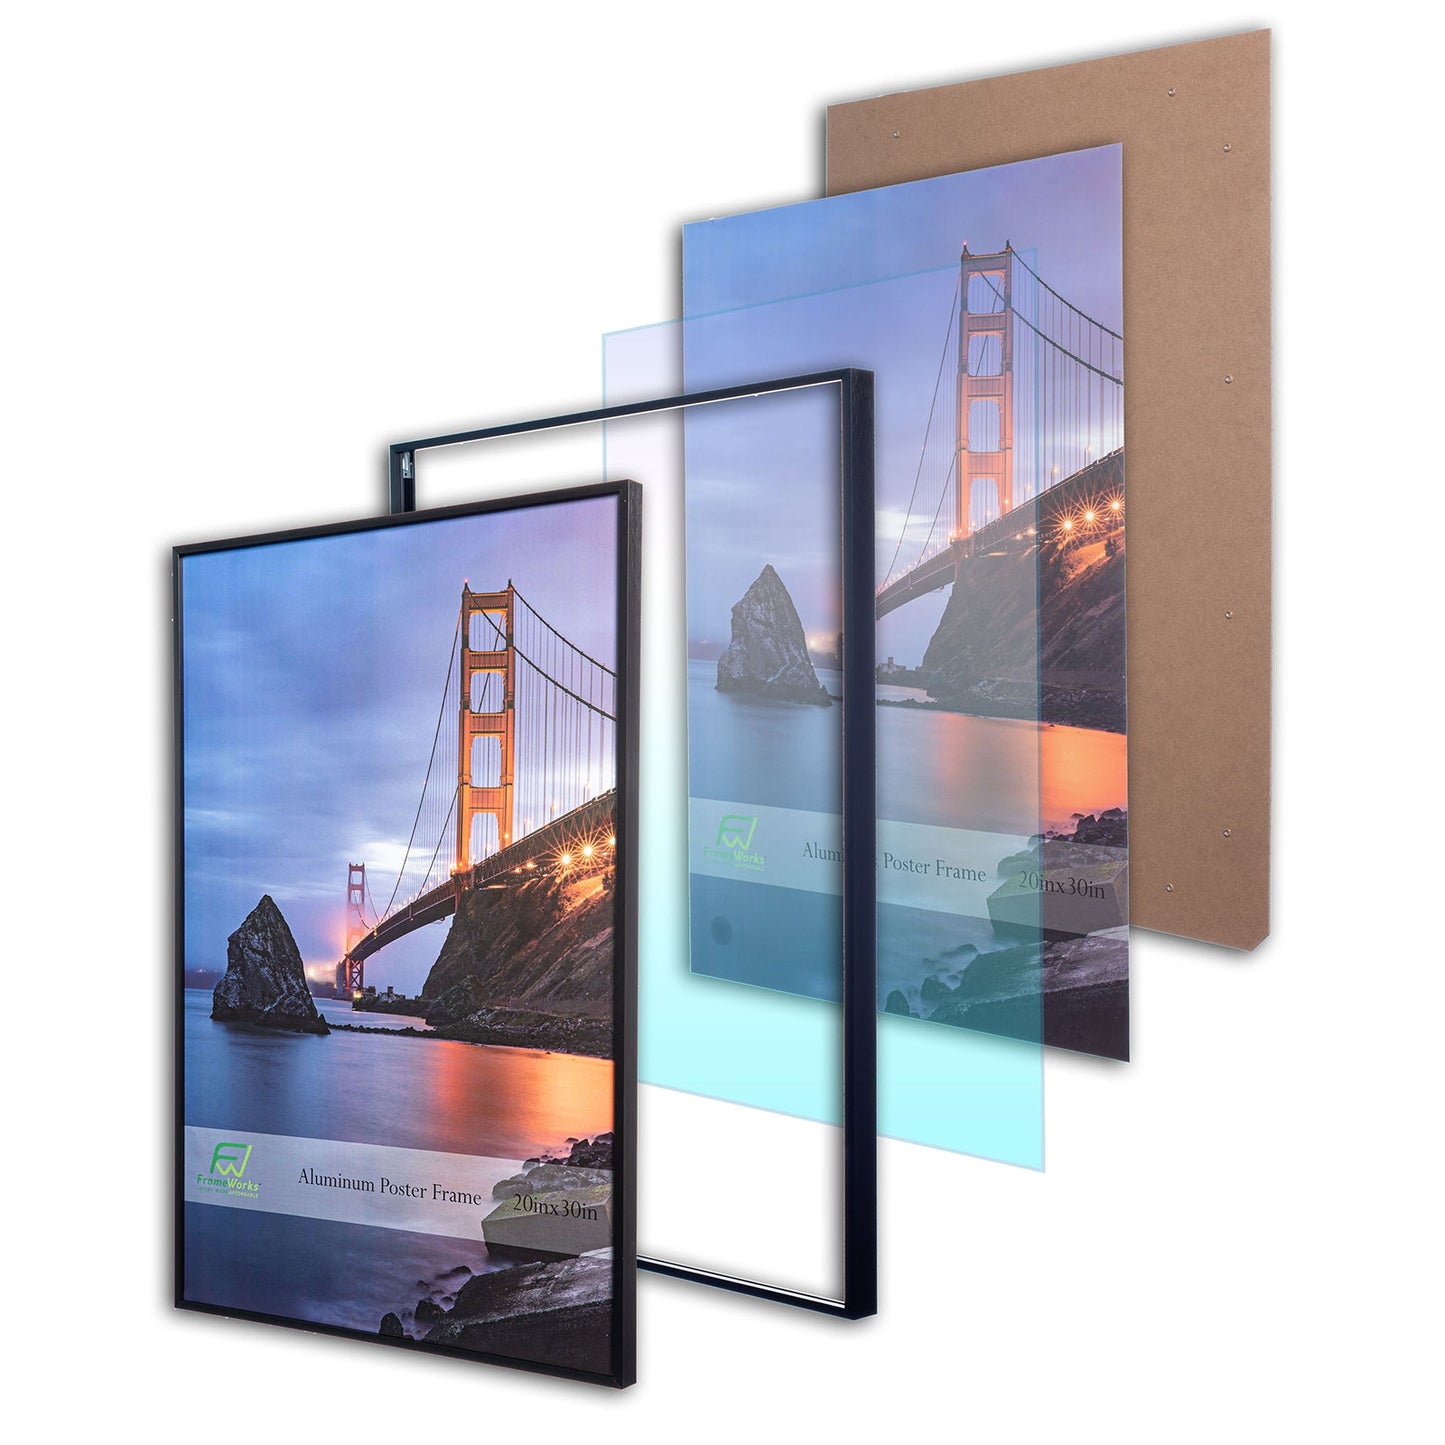 20" x 30" Black Brushed Aluminum Poster Picture Frame with Plexiglass